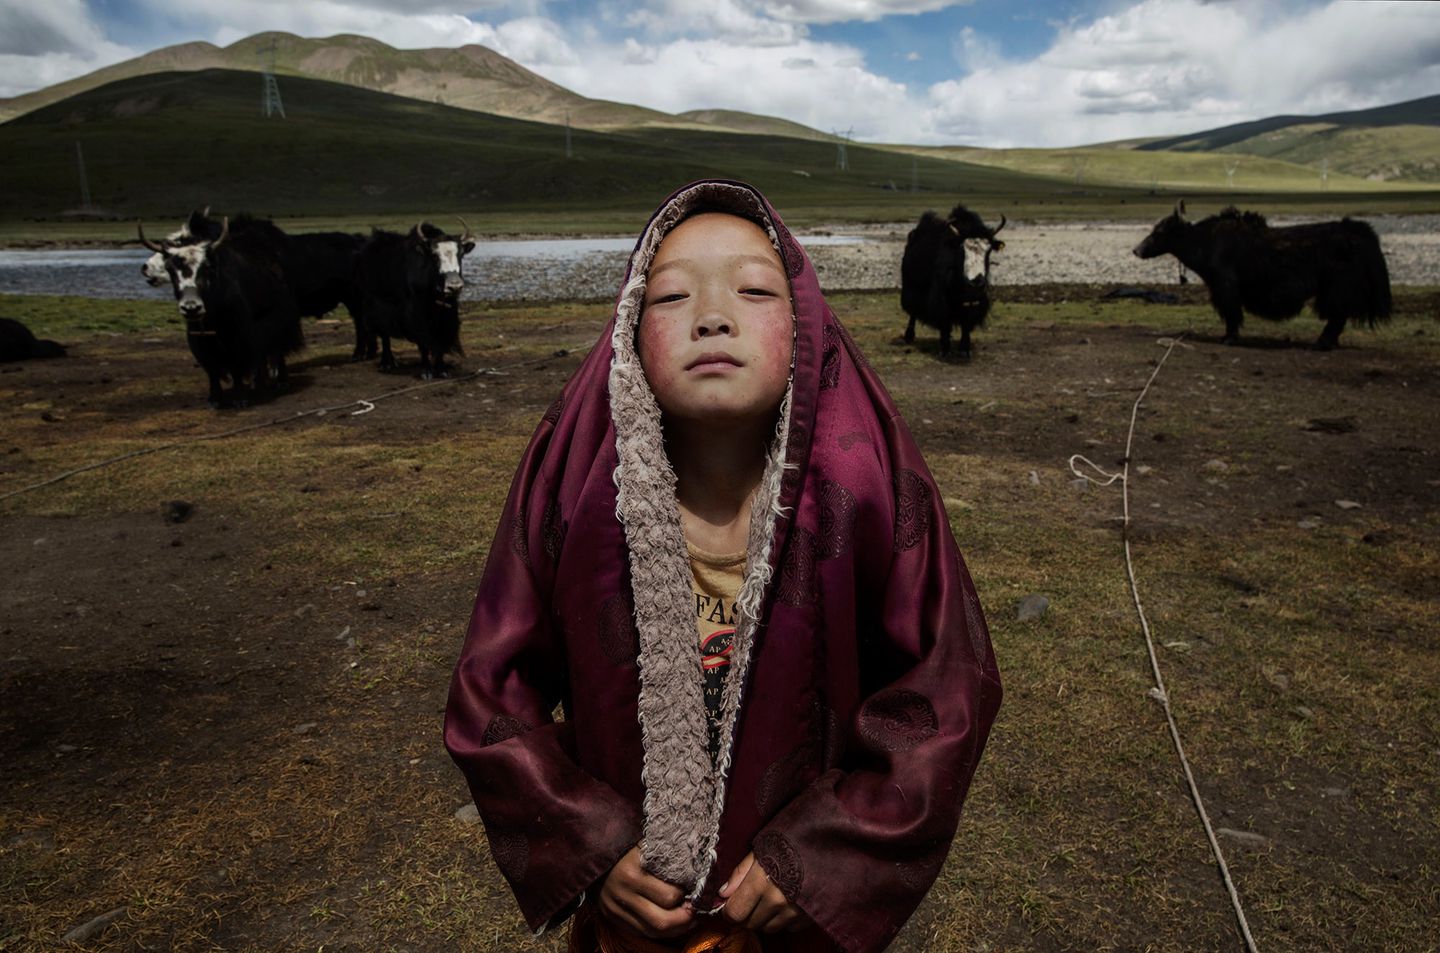 Tibet’s little-known nomadic culture, high on the ‘Roof of the World’ – The Washington Post